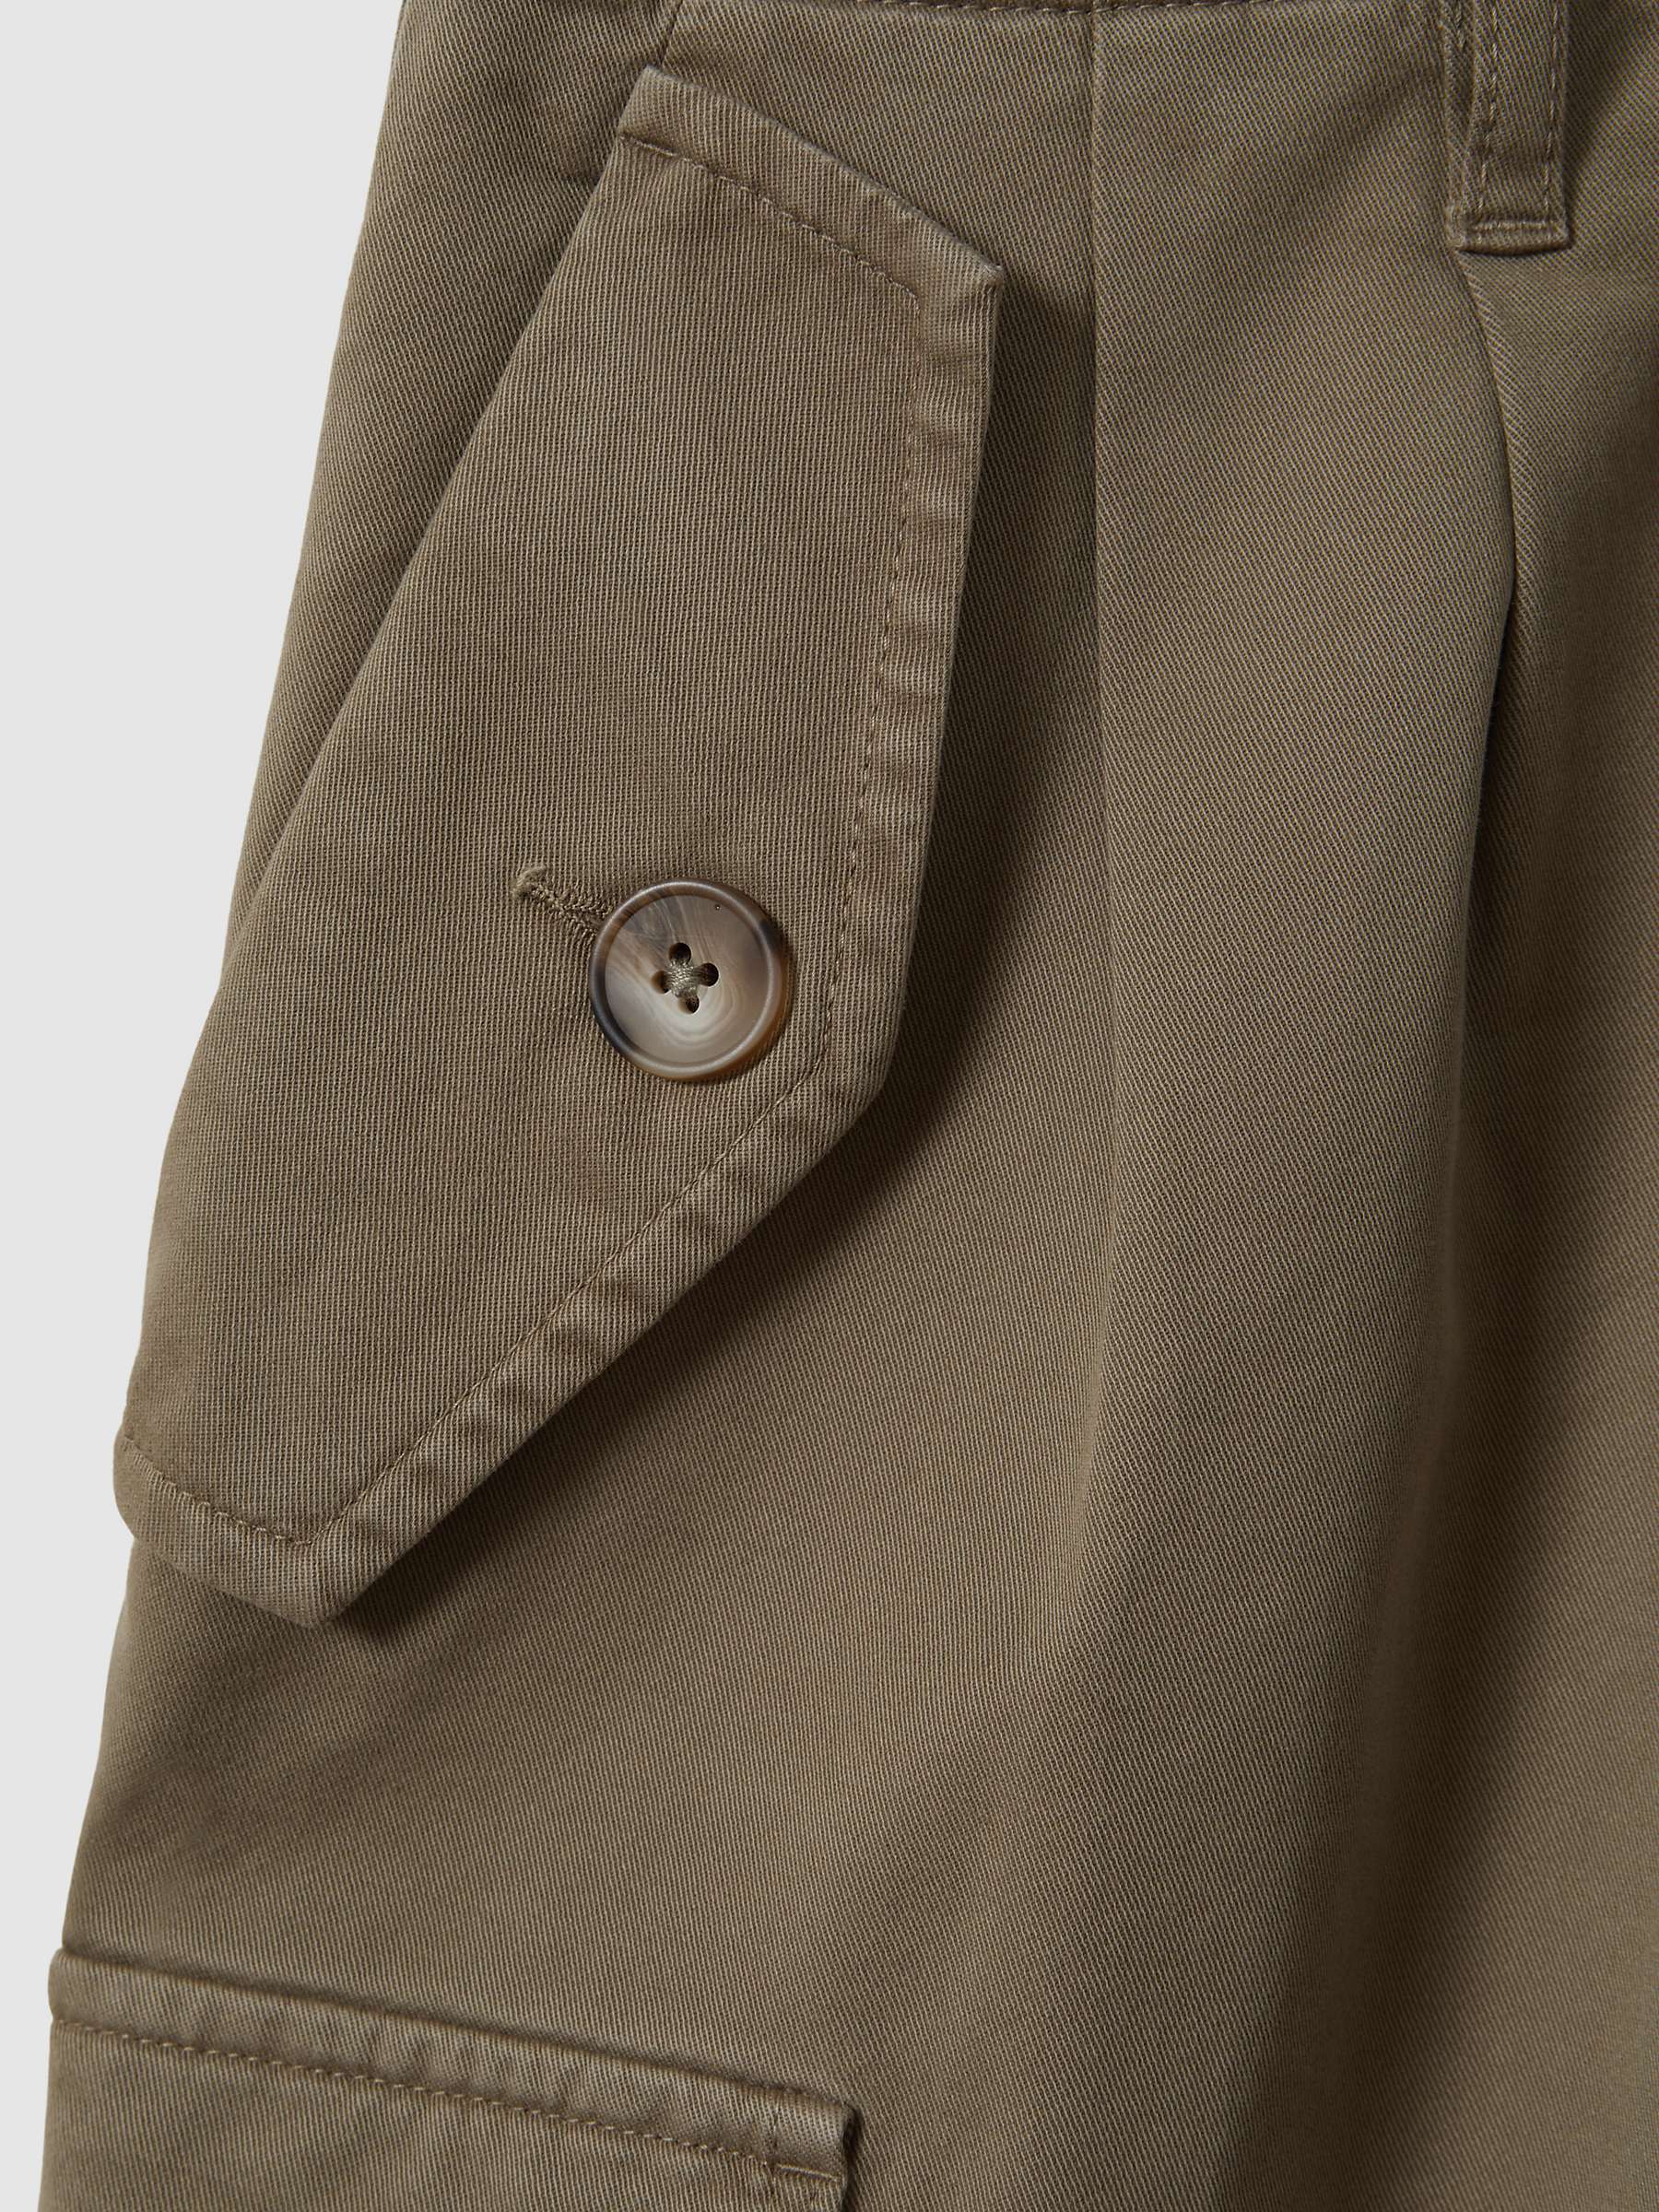 Buy Reiss Indie Tapered Combat Trousers, Khaki Online at johnlewis.com